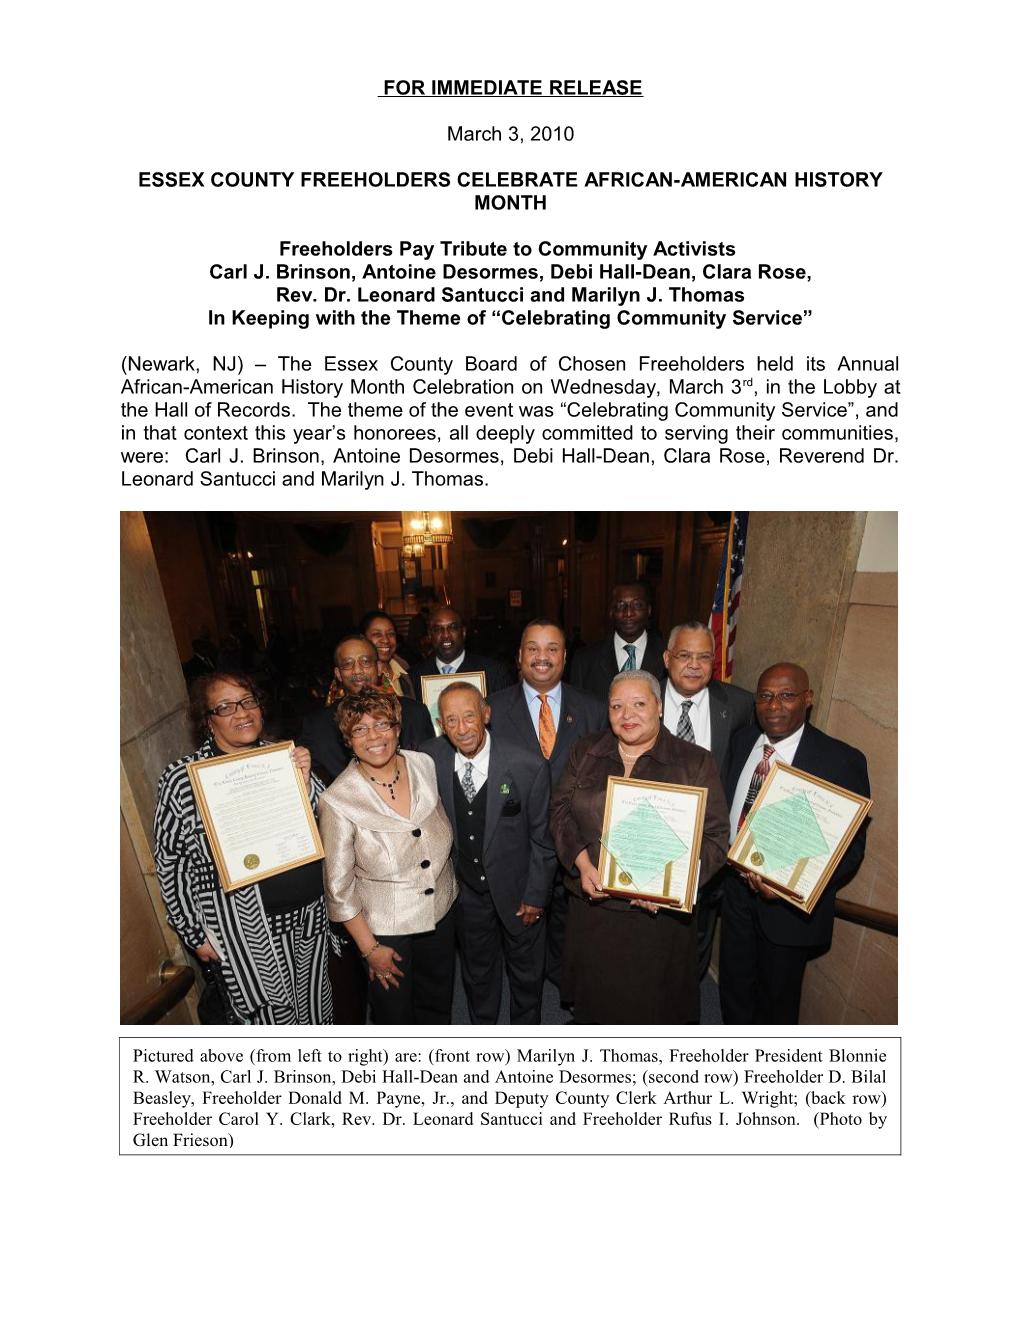 Essex County Freeholders Celebrate African-American History Month